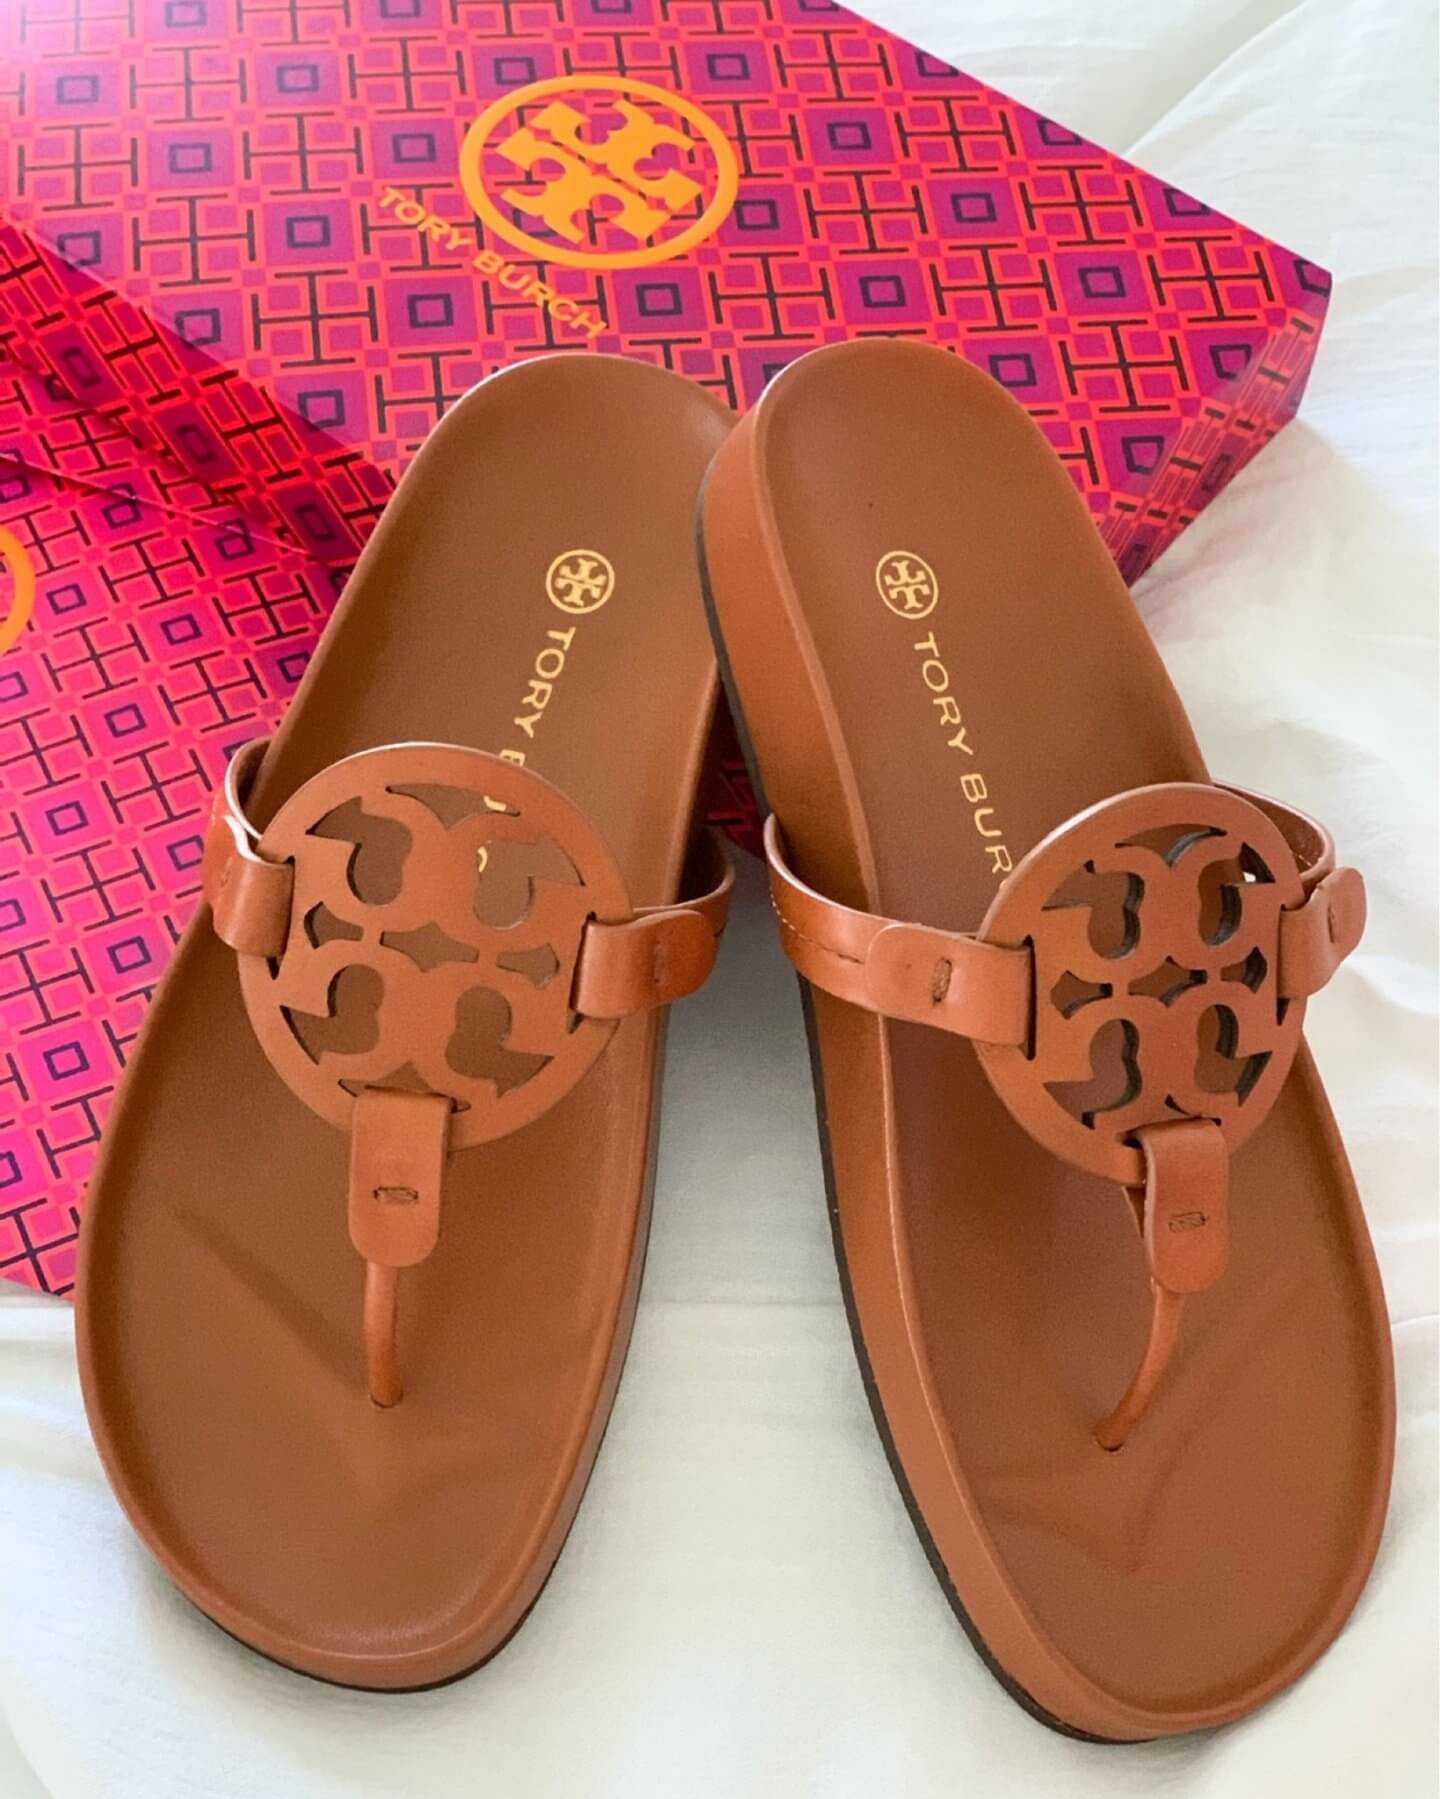 Tory Burch 30% Off Holiday Event + Giveaway! - The Double Take Girls